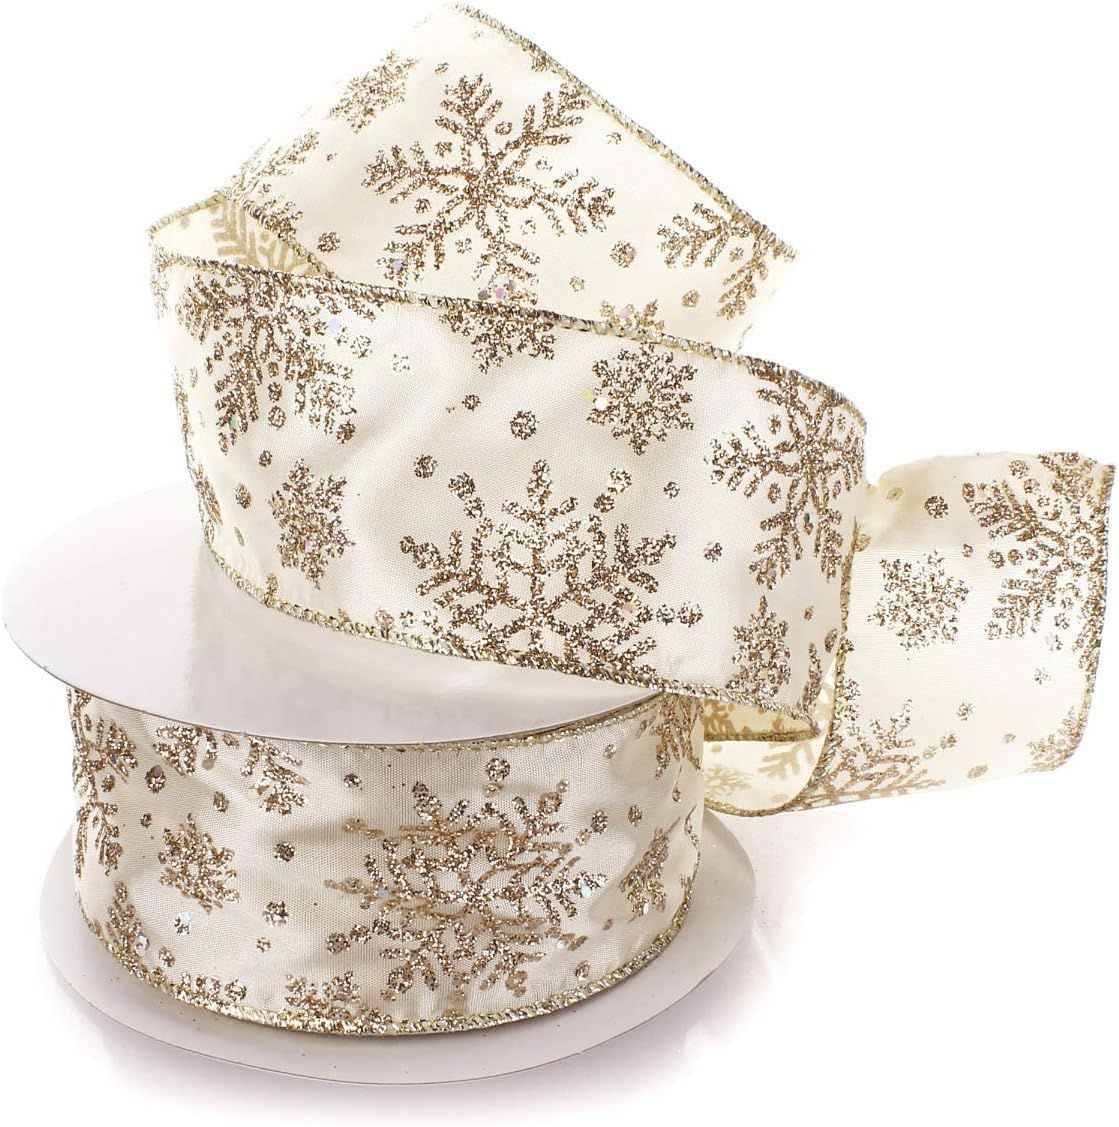 Ribbon Traditions Glitter Snowflakes Satin Wired Ribbon 2 1/2 Inch By 10 Yards - Light Gold | Amazon (US)